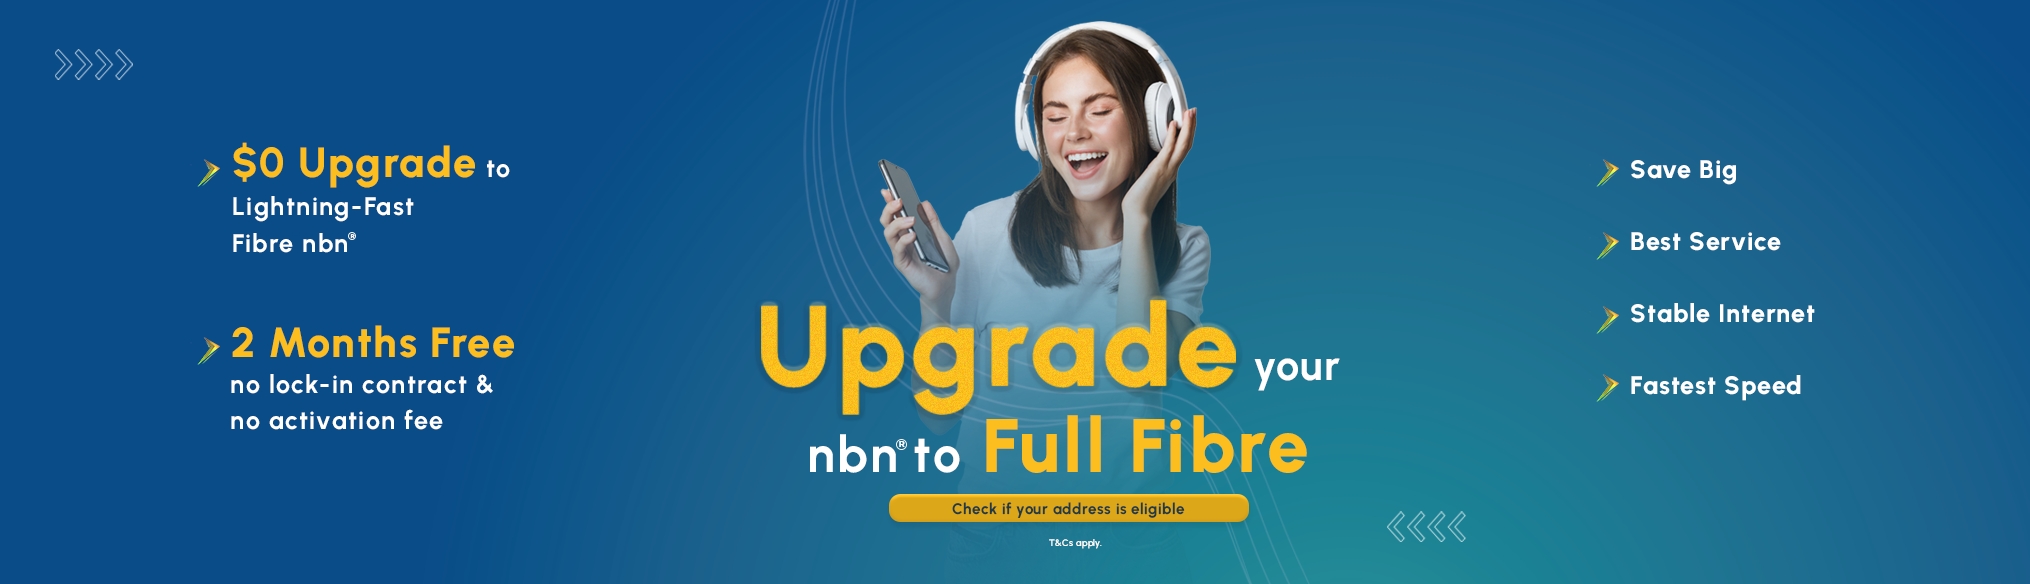 NBN upgrade to FTTP